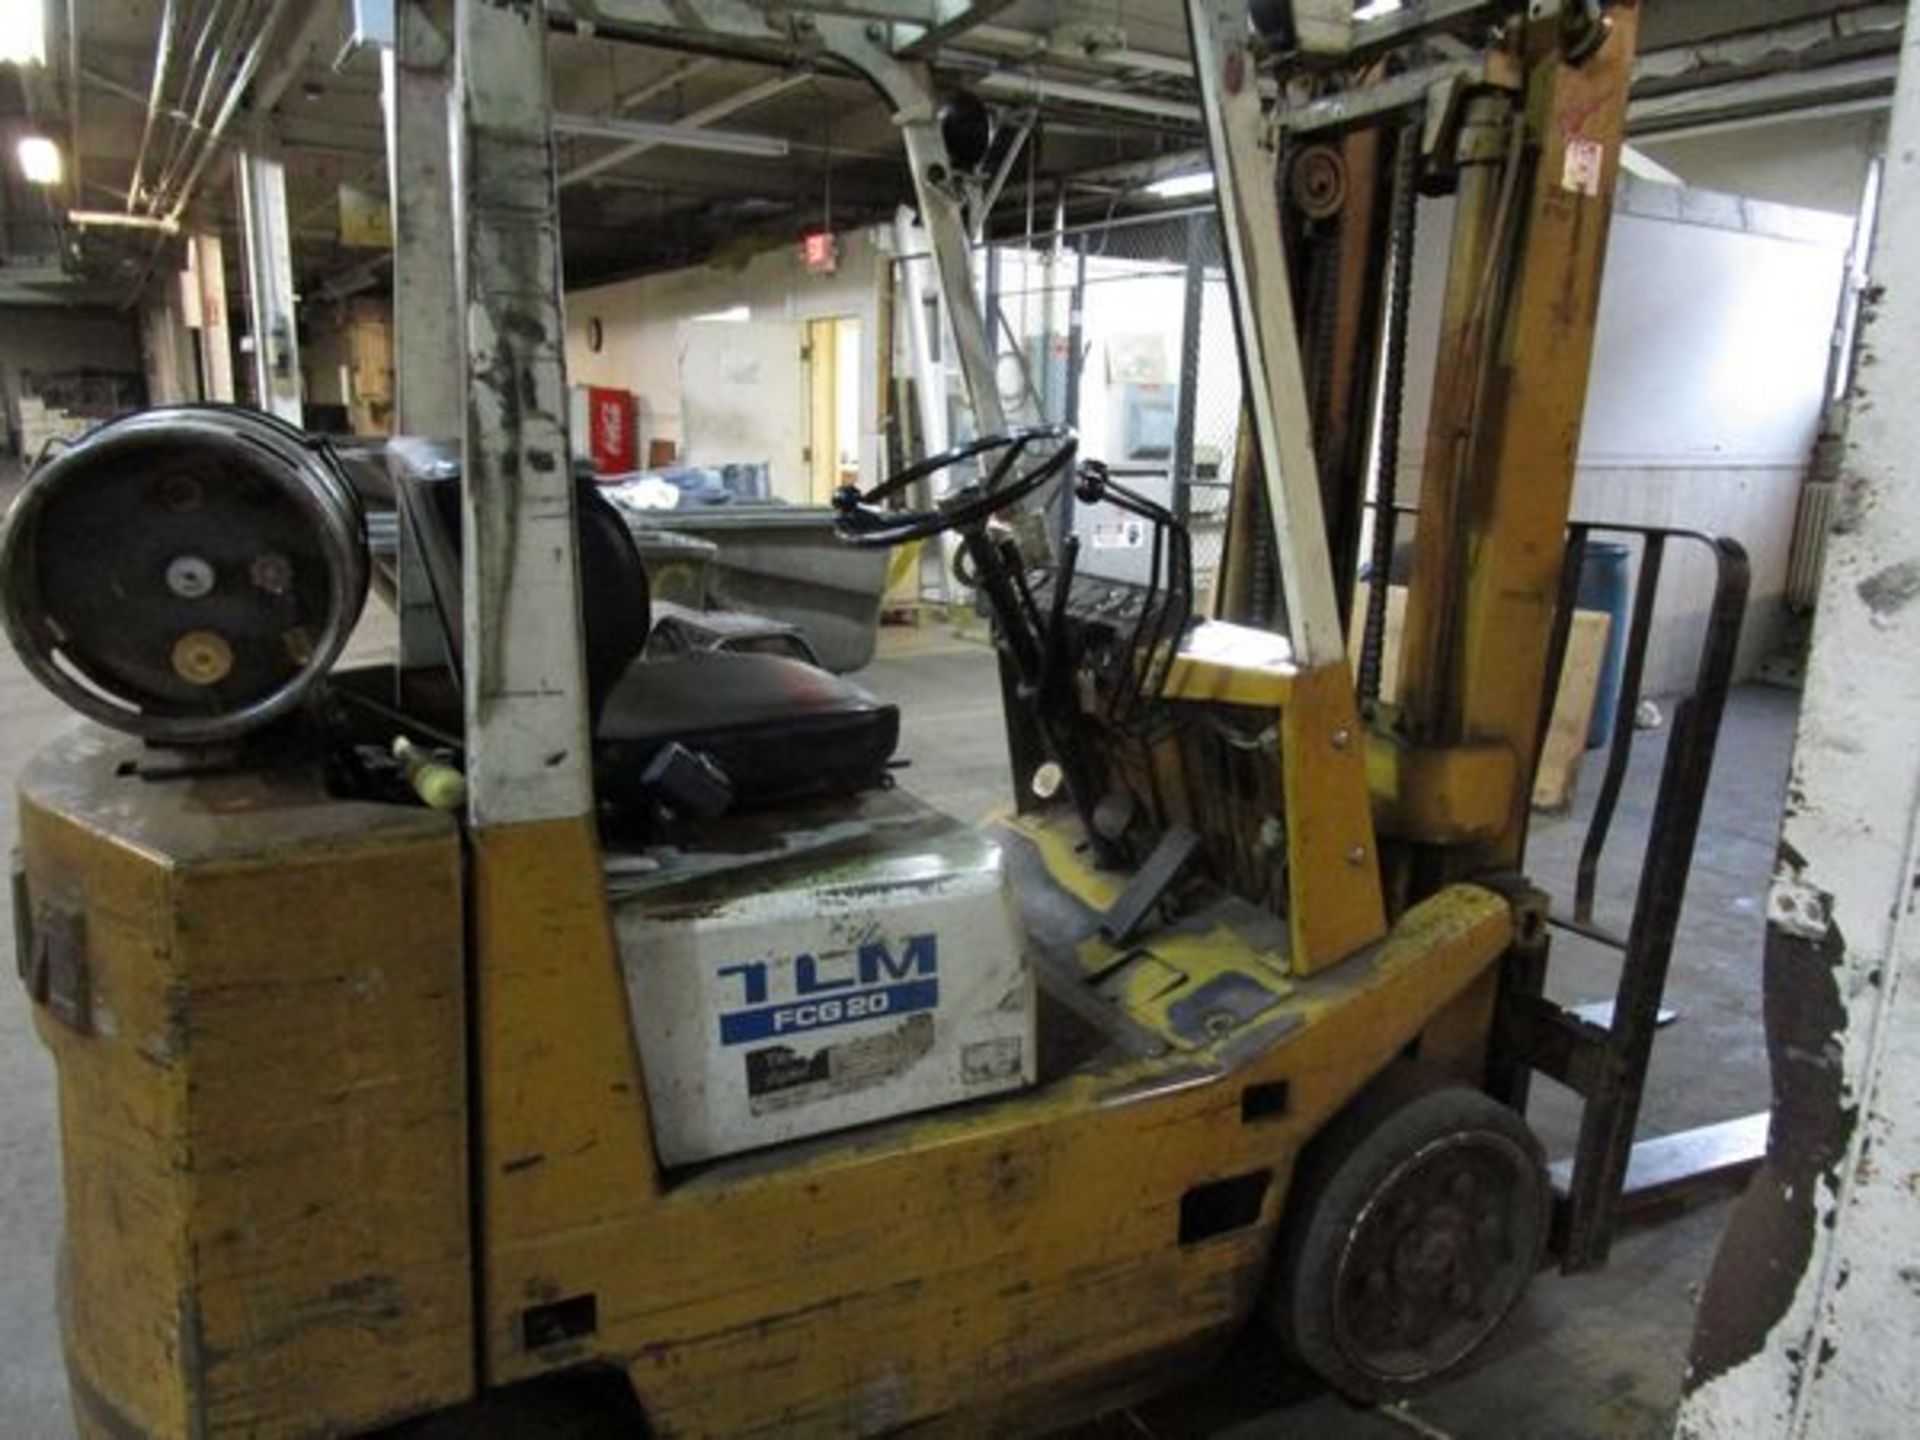 TCM FCG N6 LPG Forklift, s/n 49000175, 4000 Lb., 9797 Hrs. (Located in W. Springfield, MA) (LATE - Image 2 of 3